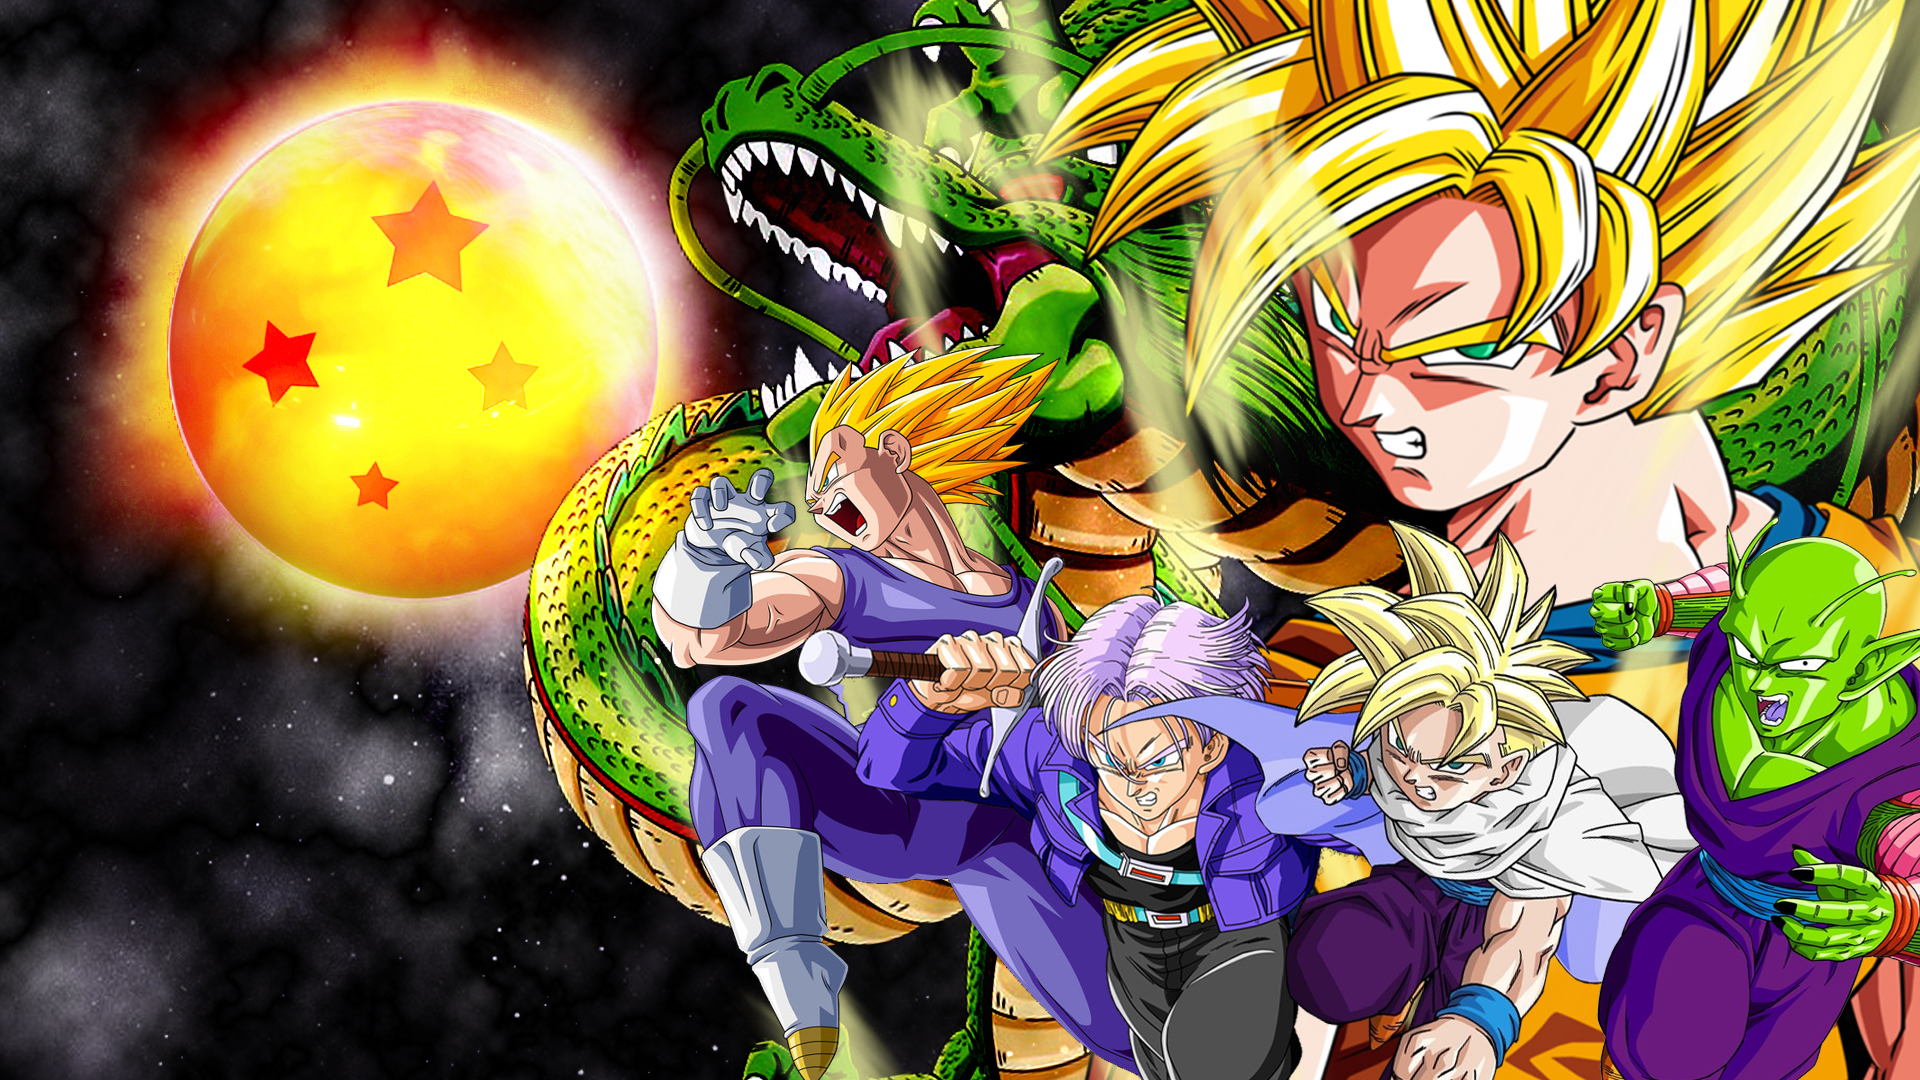 Dragon ball characters mix wallpaper by dbzwallpapers on